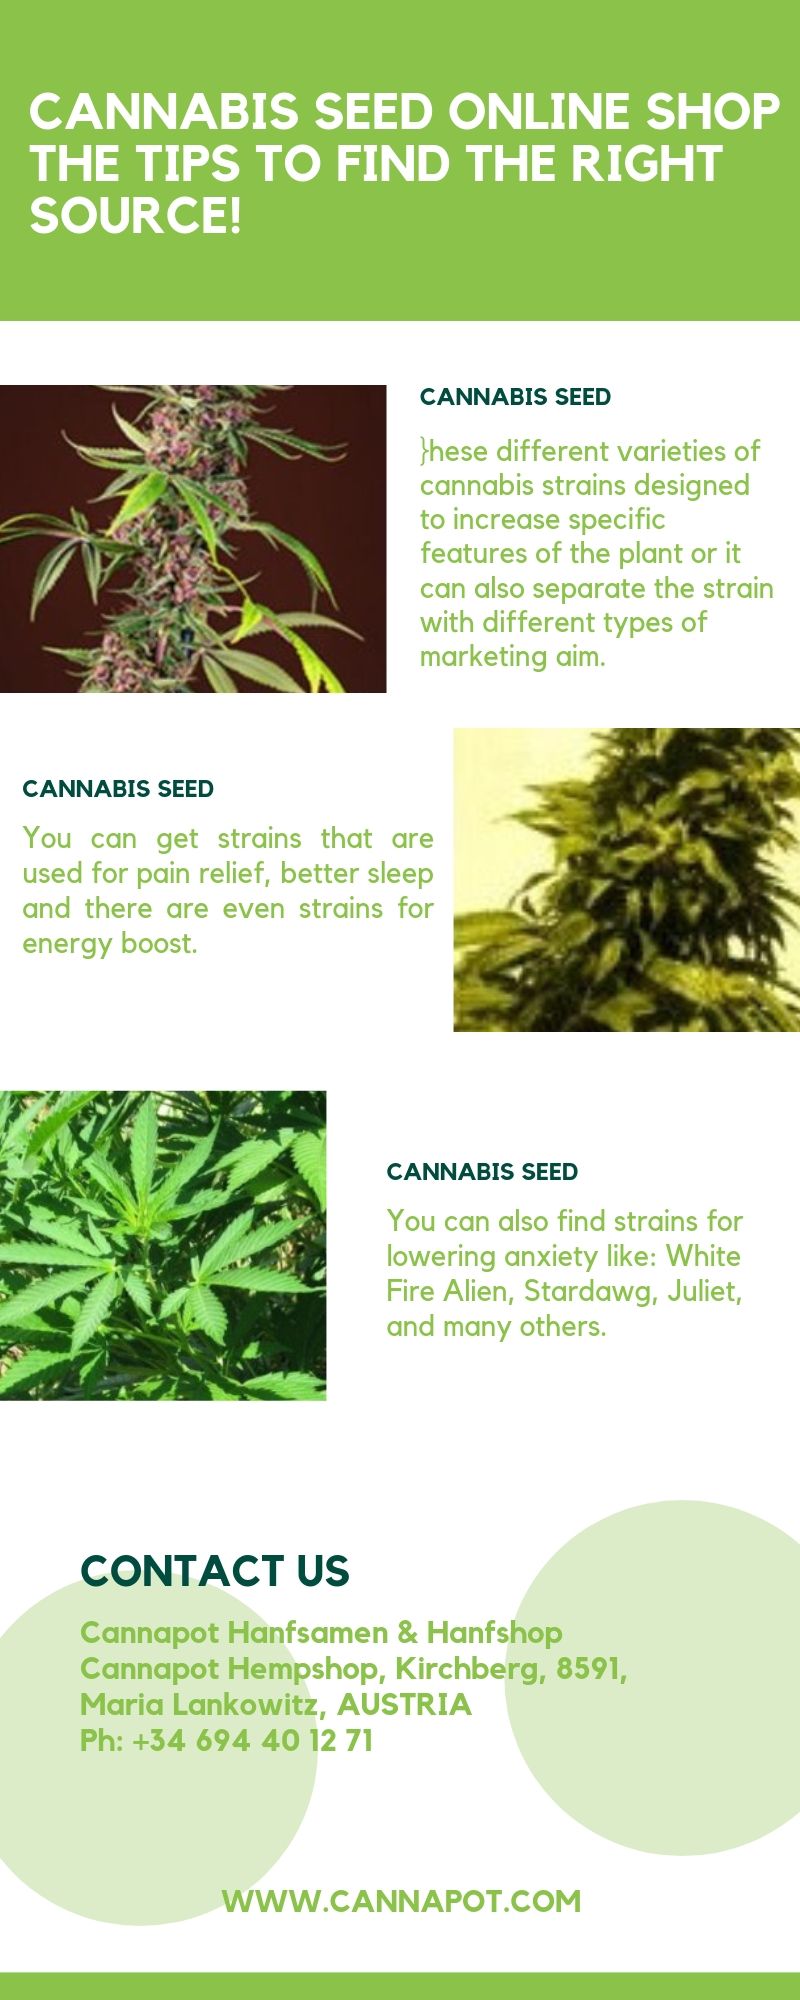 CANNABIS SEED ONLINE SHOP.jpg  by Cannapot